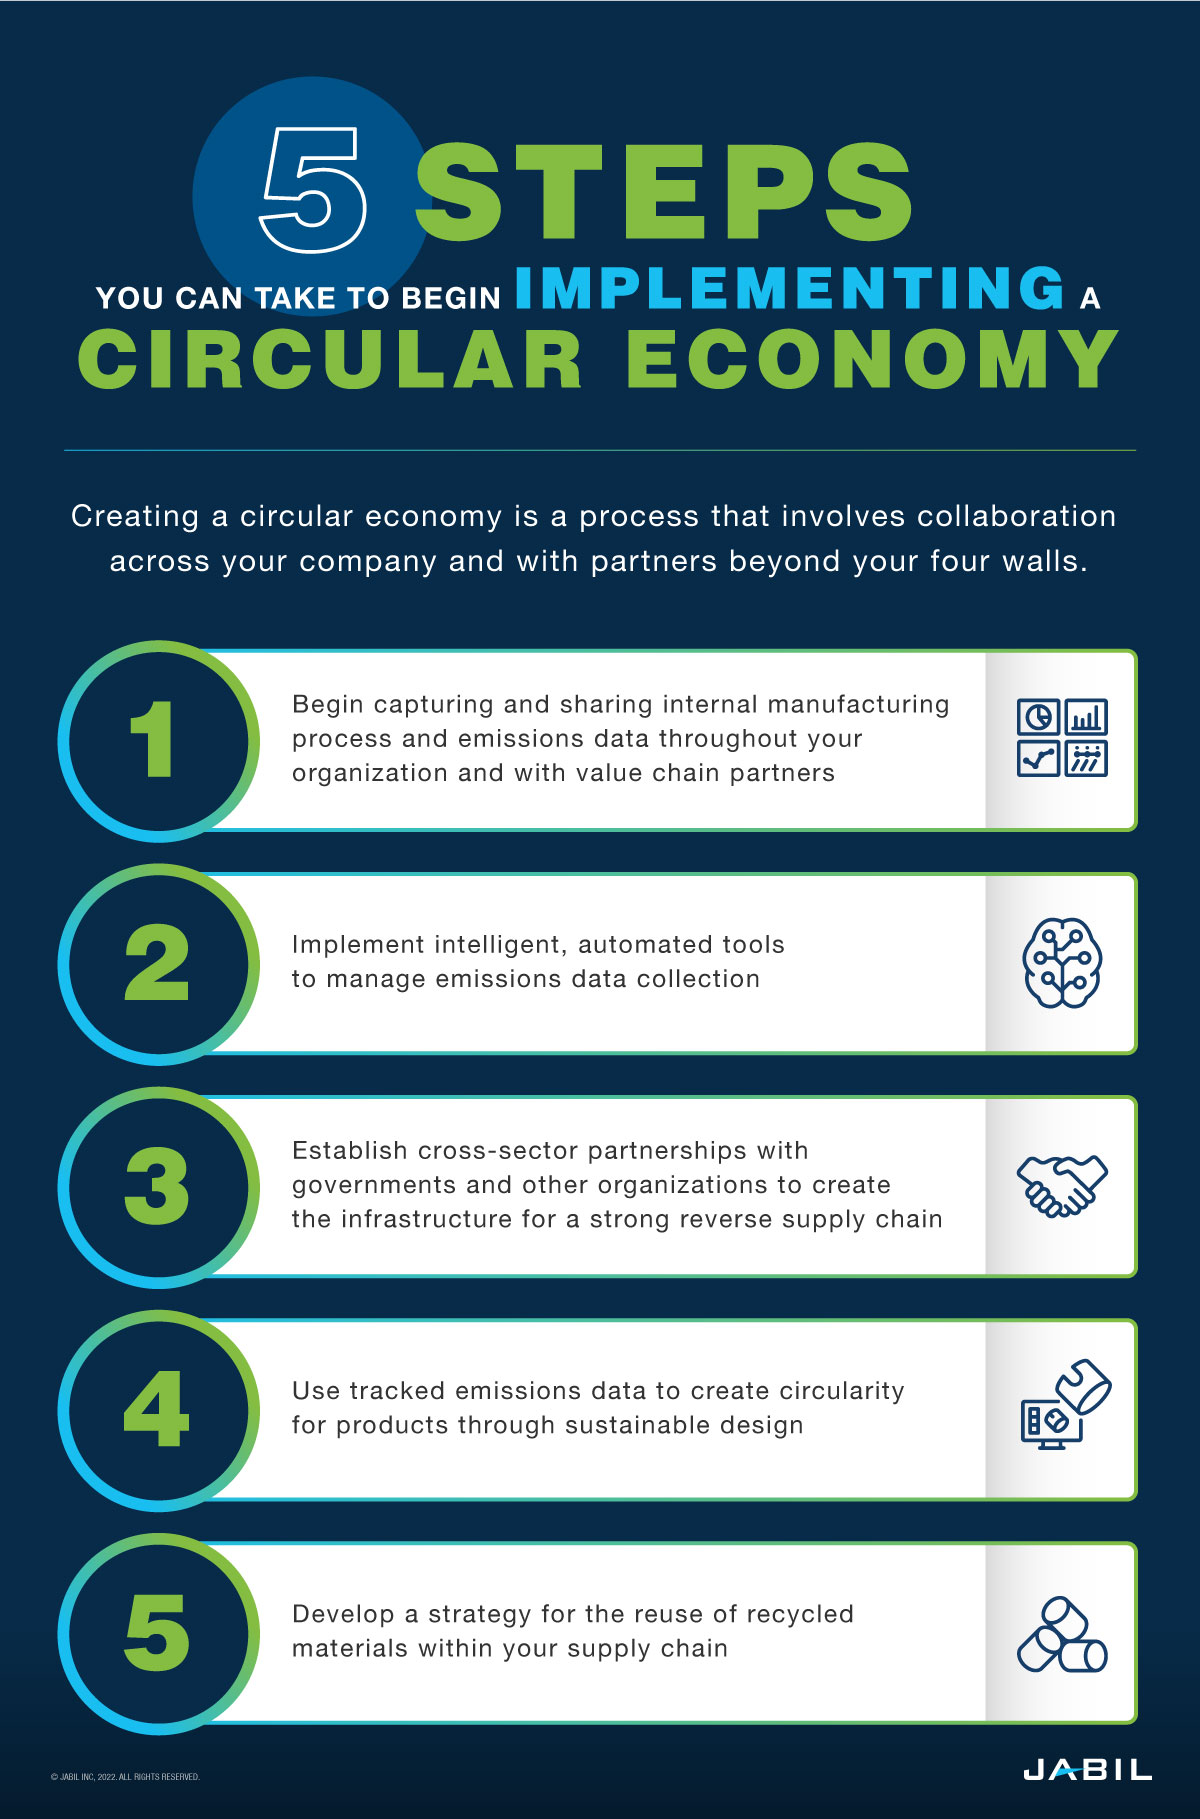 circularity will only bring you back to where you started